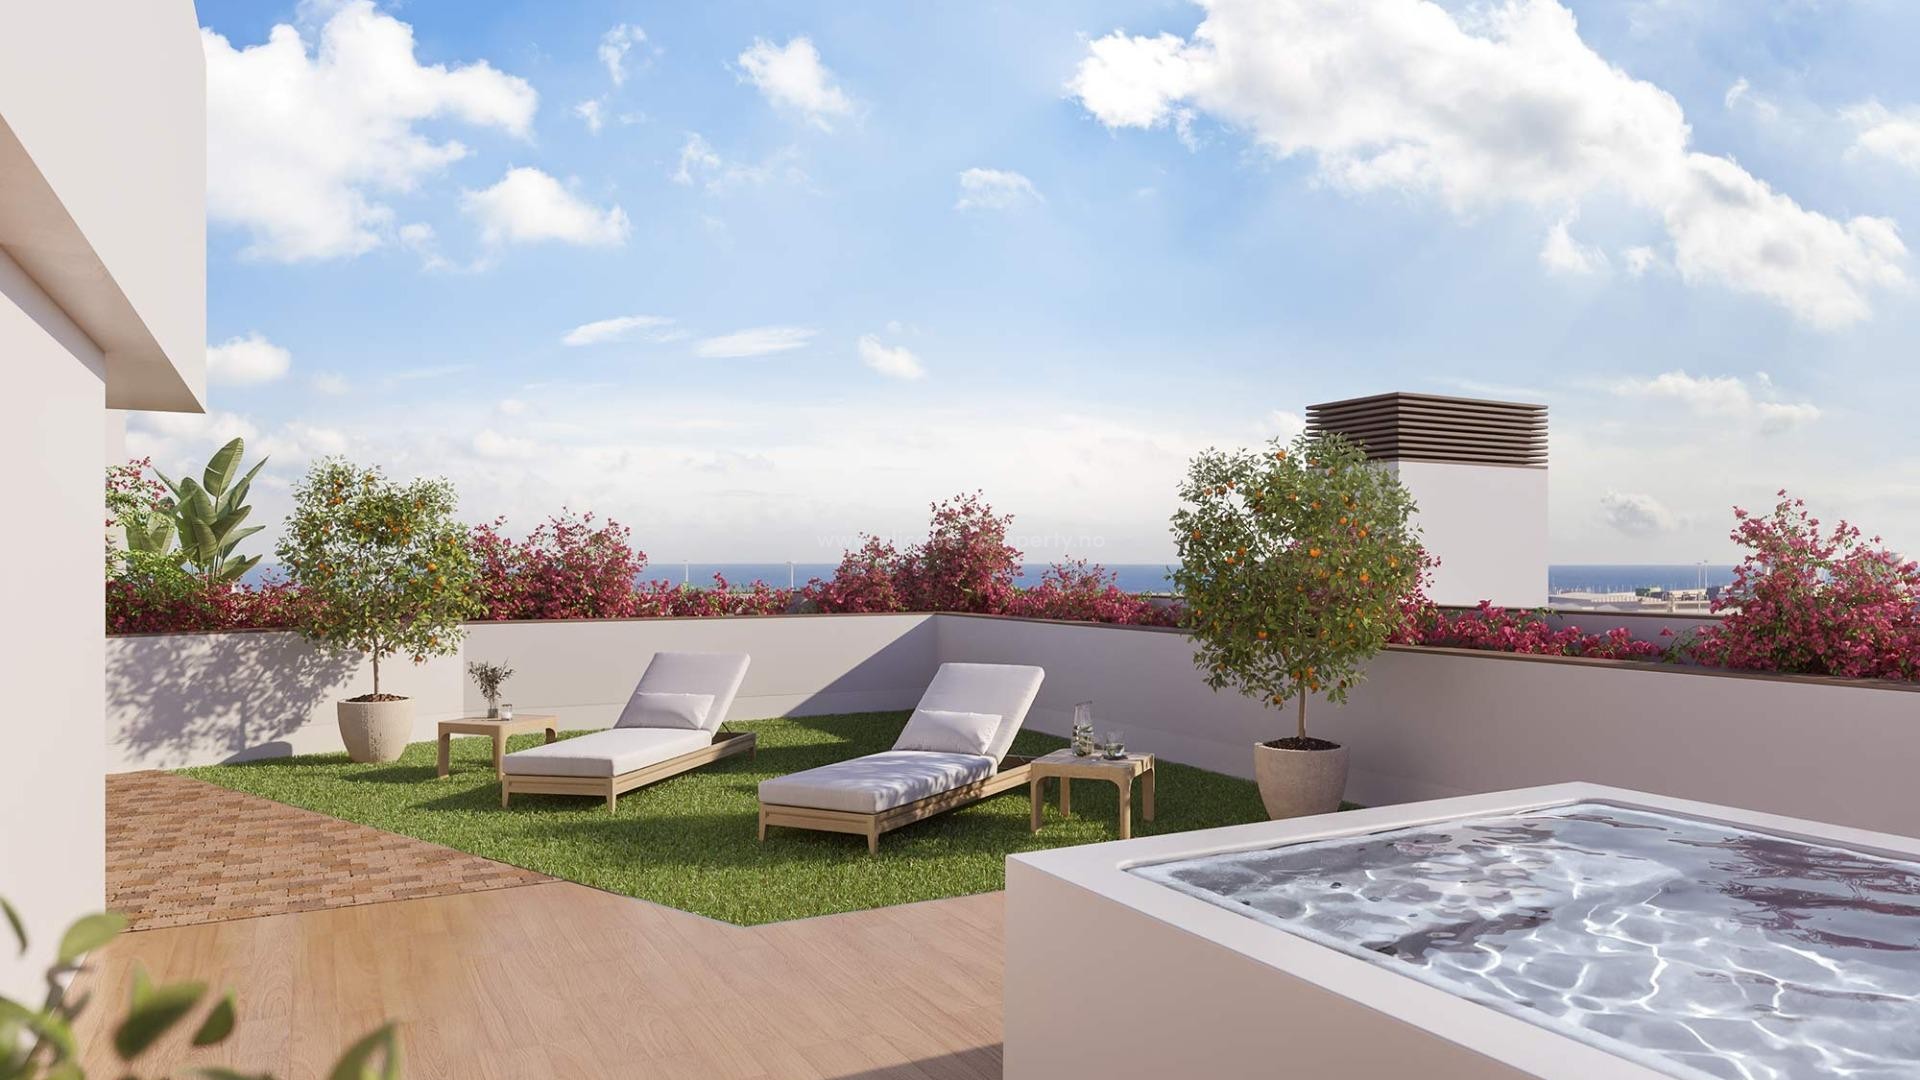 53 new exclusive apartments in Alicante city, 2/3/4 bedrooms, 2 bathrooms, incredible panoramic views, swimming pool, gym and roof terrace with sun terrace.